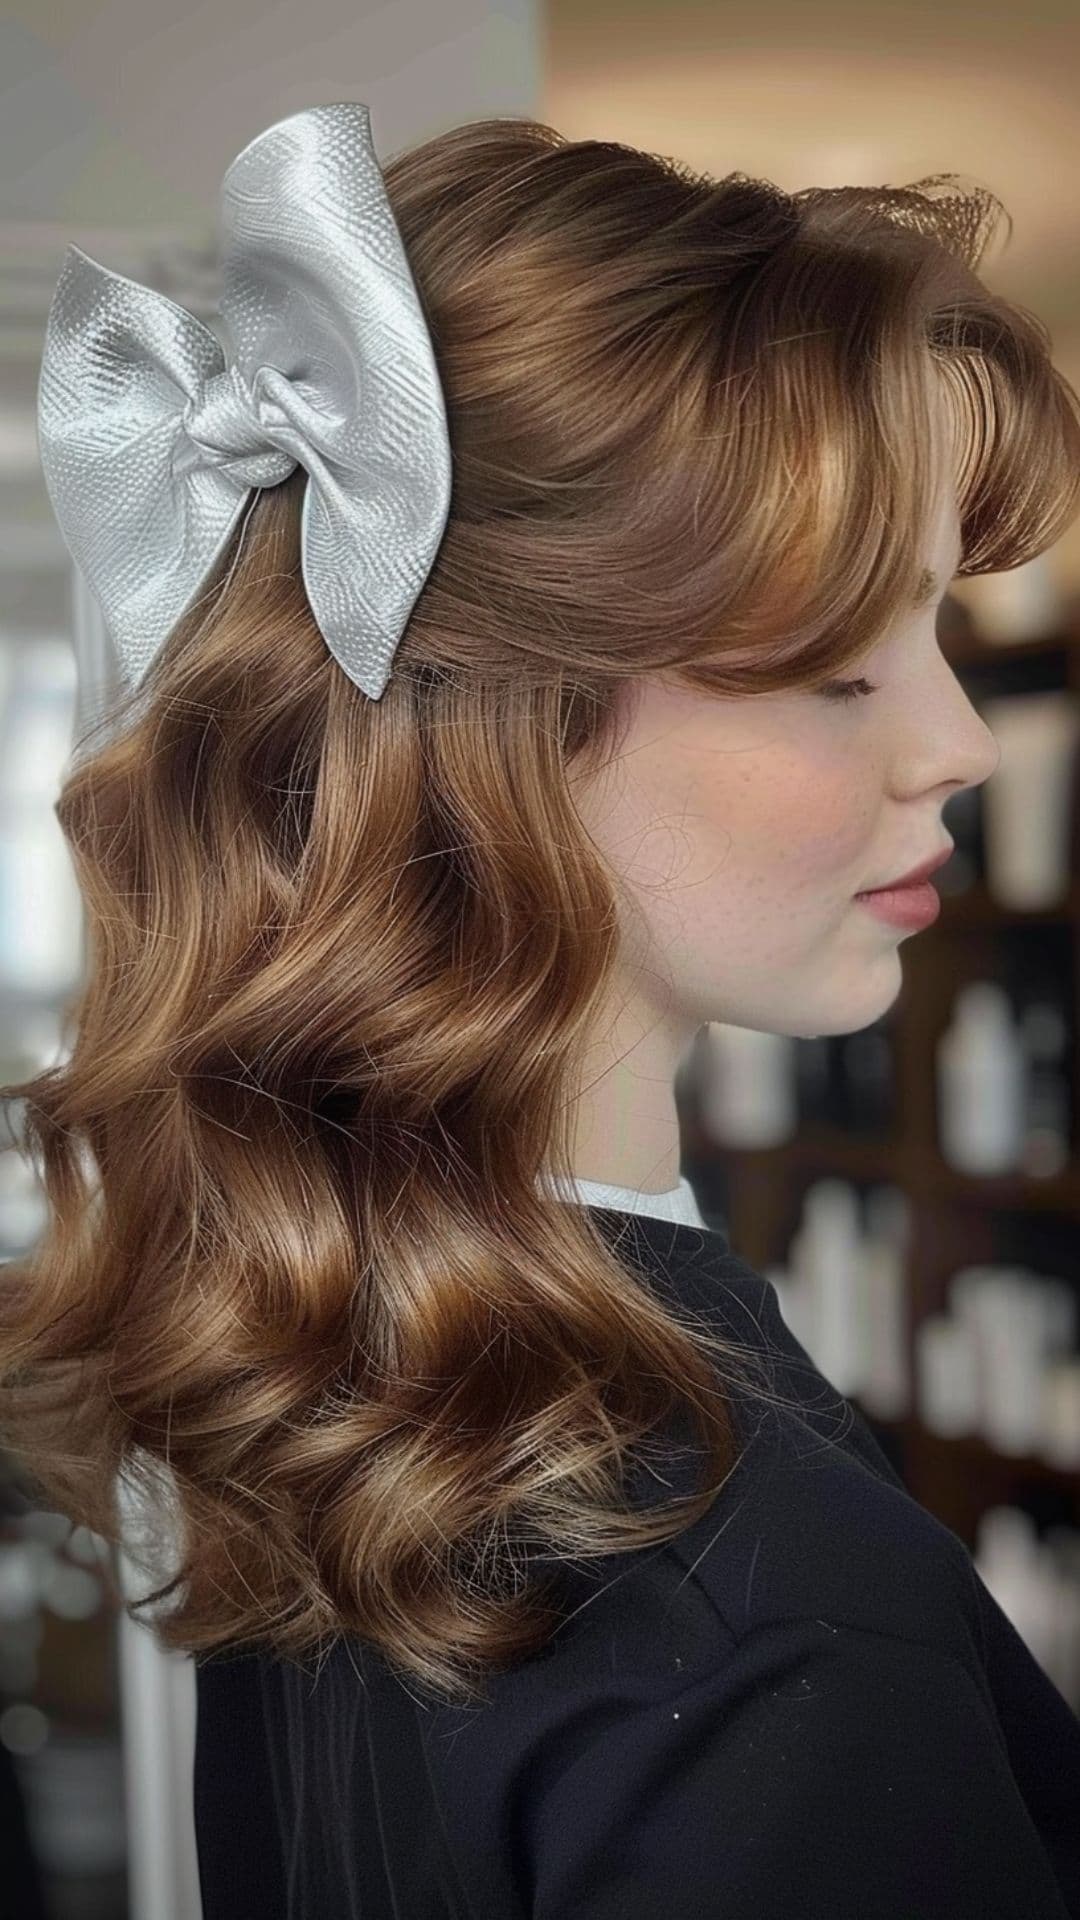 A woman modelling a half-up with bow hairstyle.